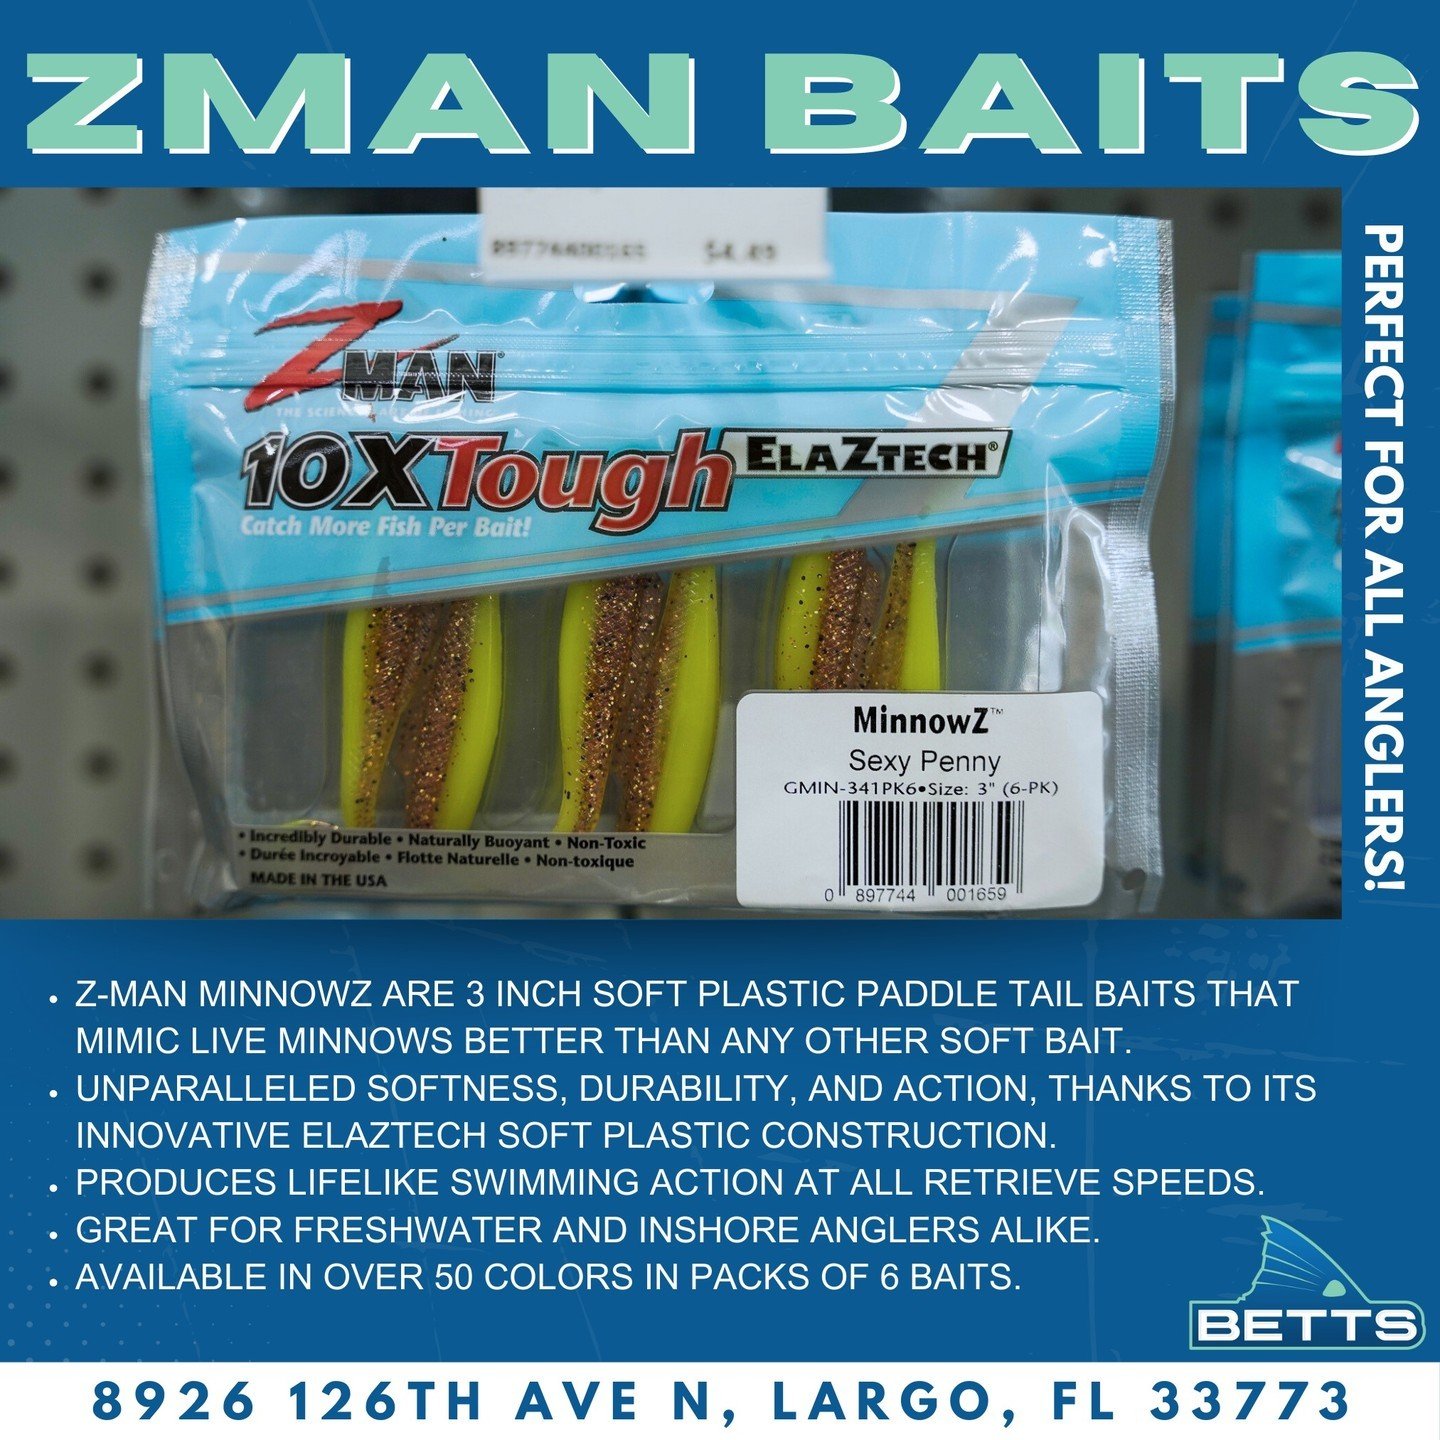 Dive into artificial bait fishing with Zman MinnowZ! Whether you're hitting freshwater or exploring inshore saltwater, these lures are your go-to for igniting those hungry strikes. Start your angling adventure right&mdash;grab yours today!

#saltwate